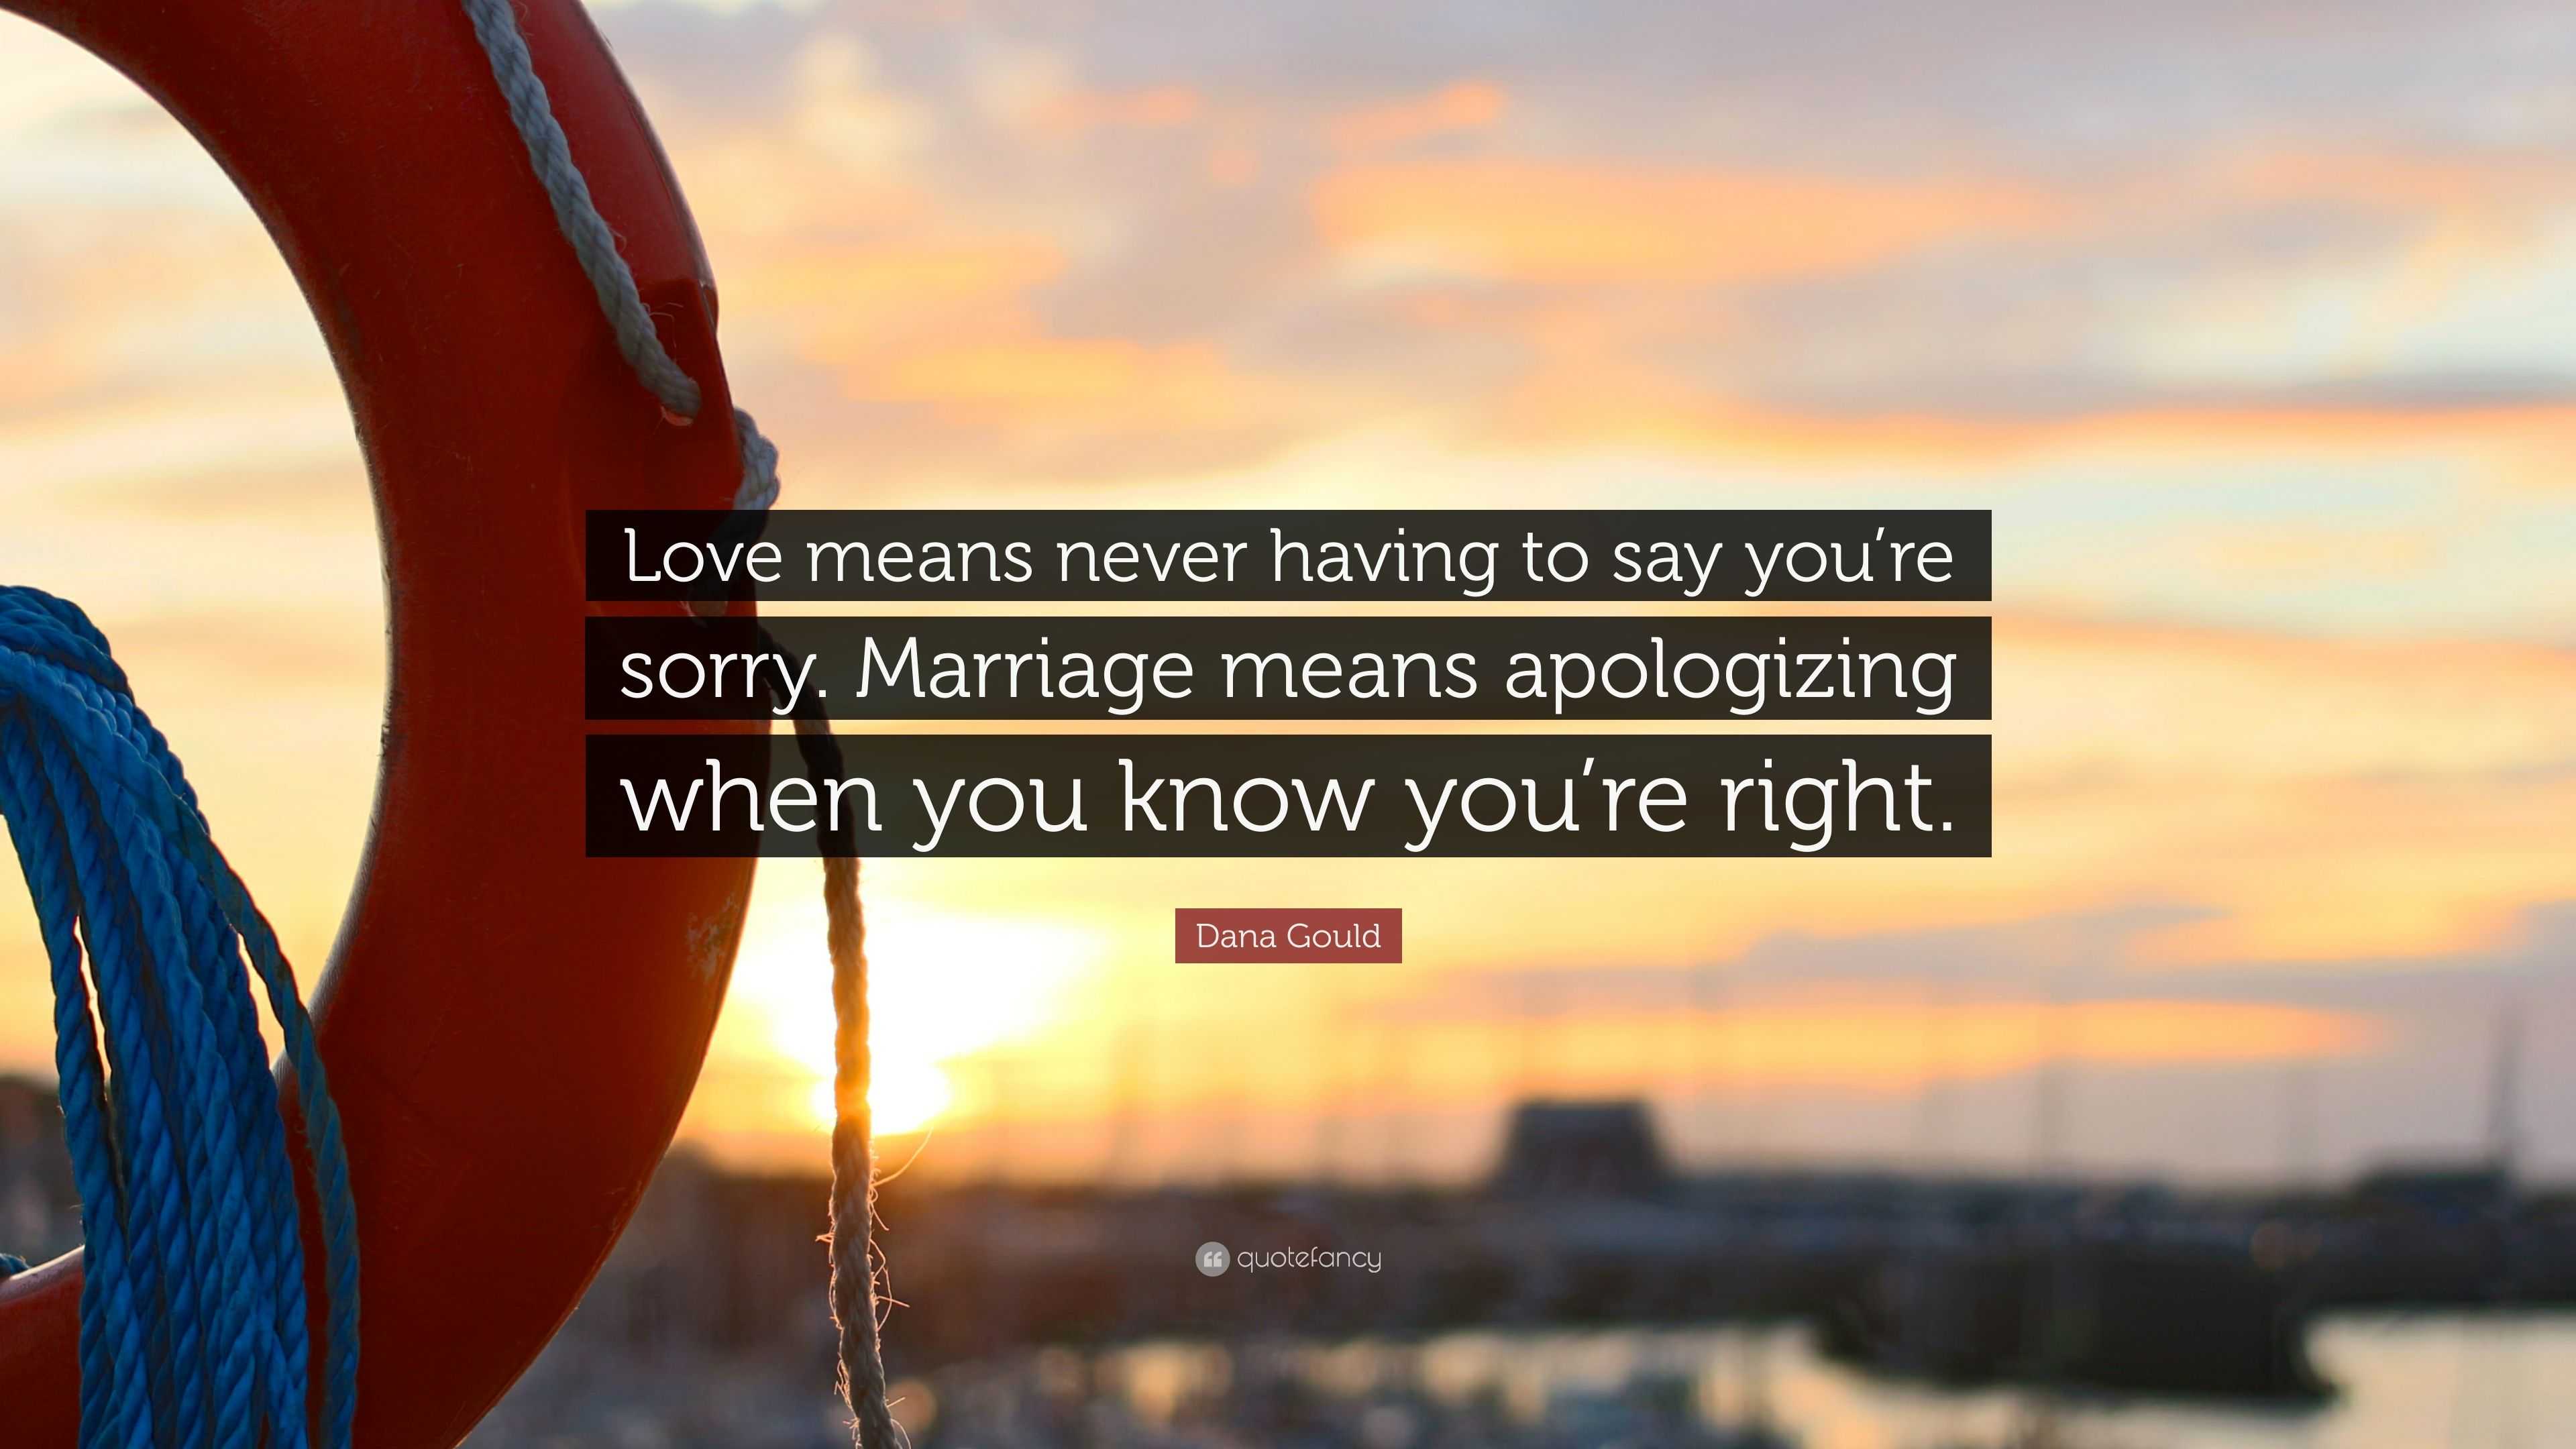 Dana Gould Quote “Love means never having to say you re sorry